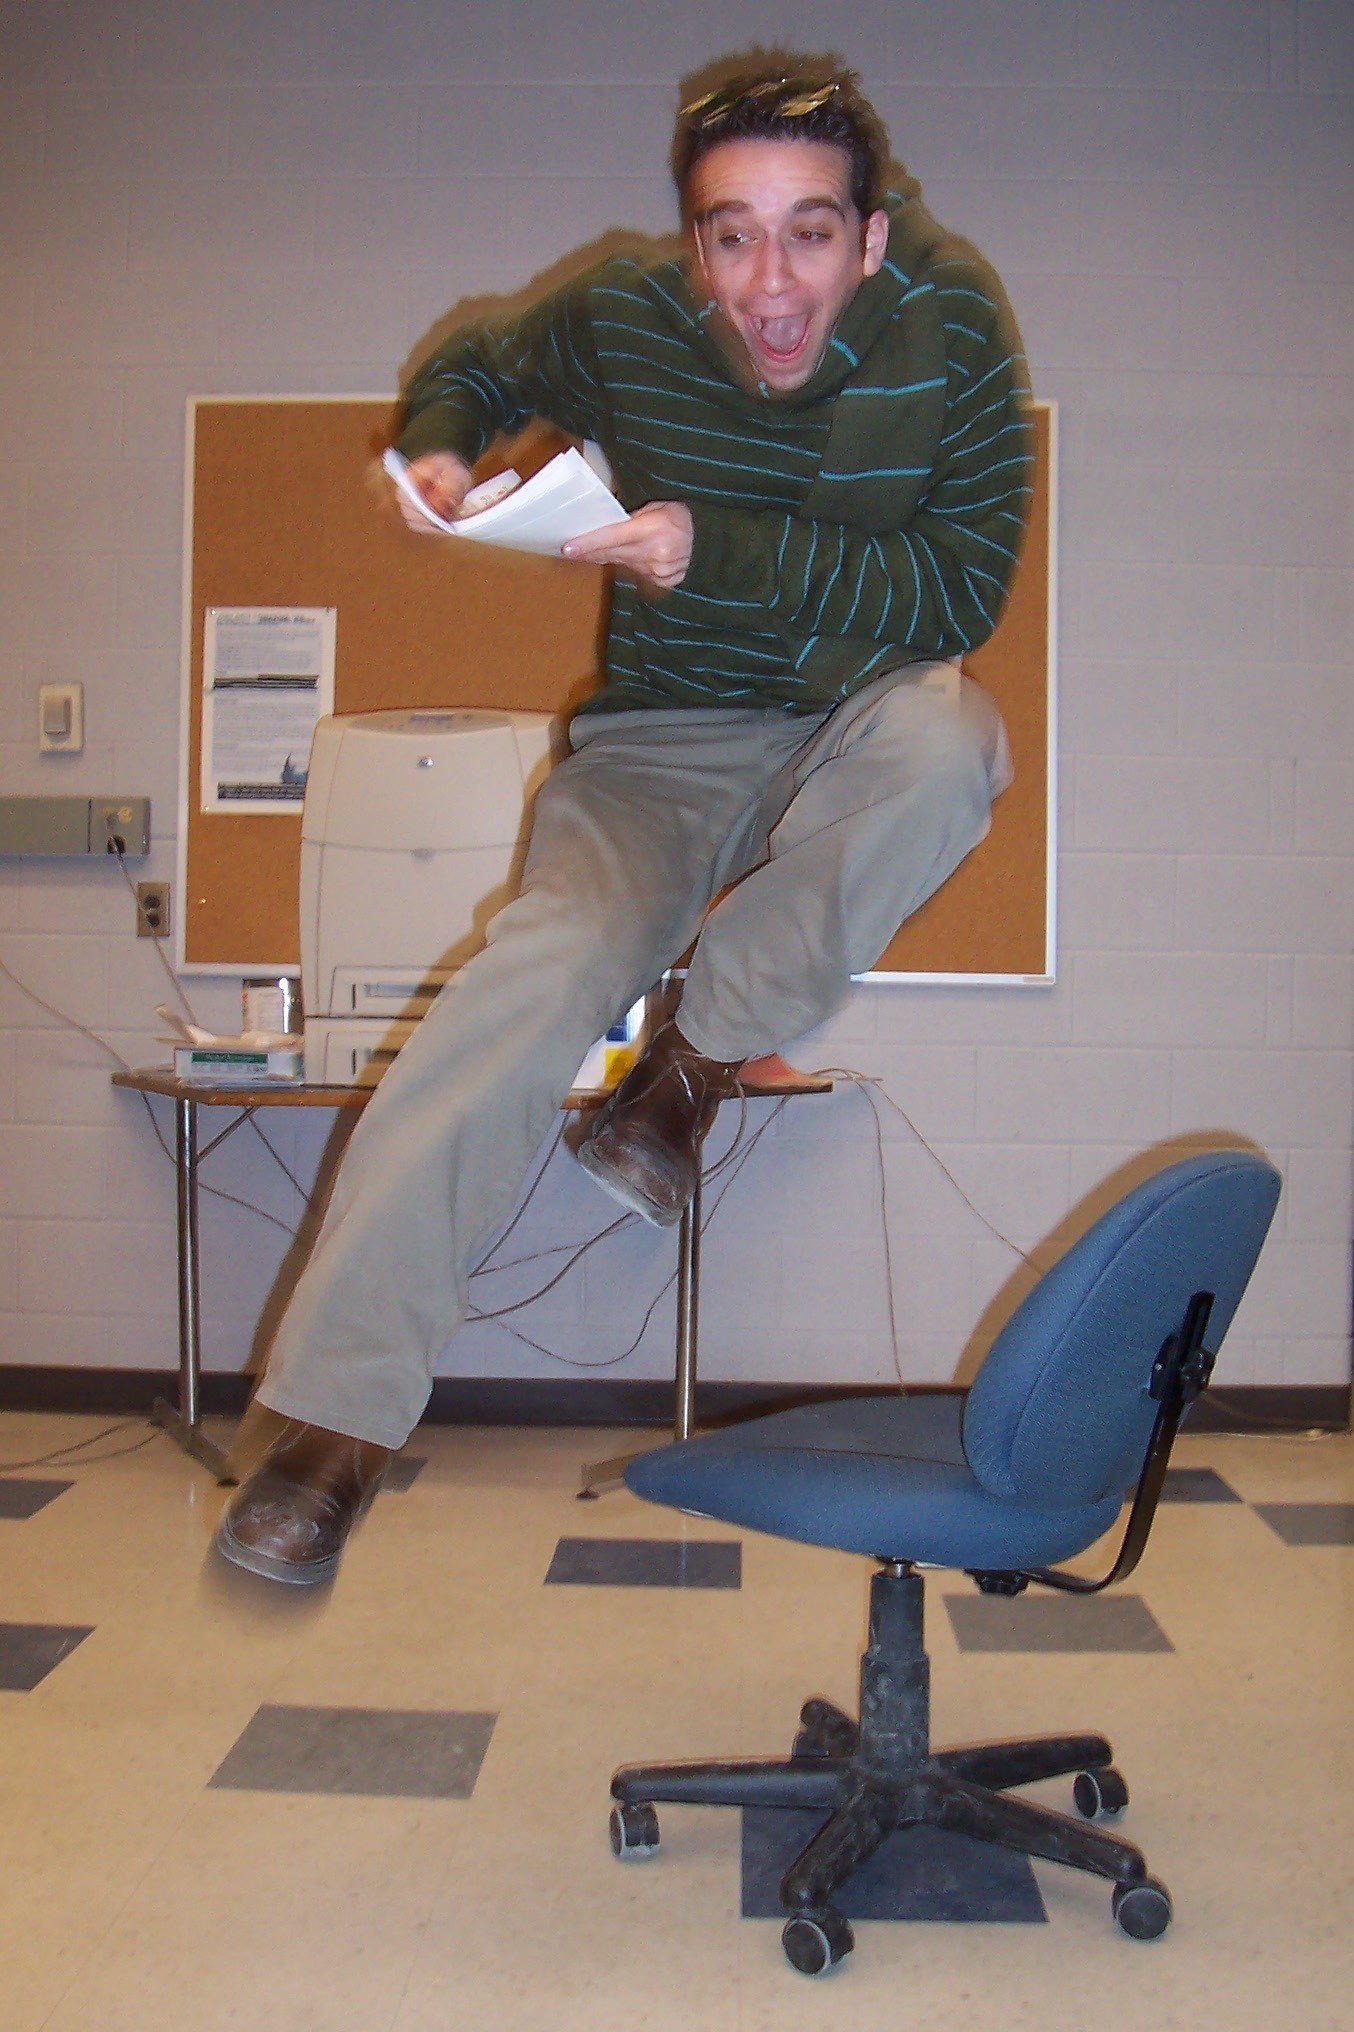 Ori Dagan, holding papers,  in mid-air jumping over a desk chair